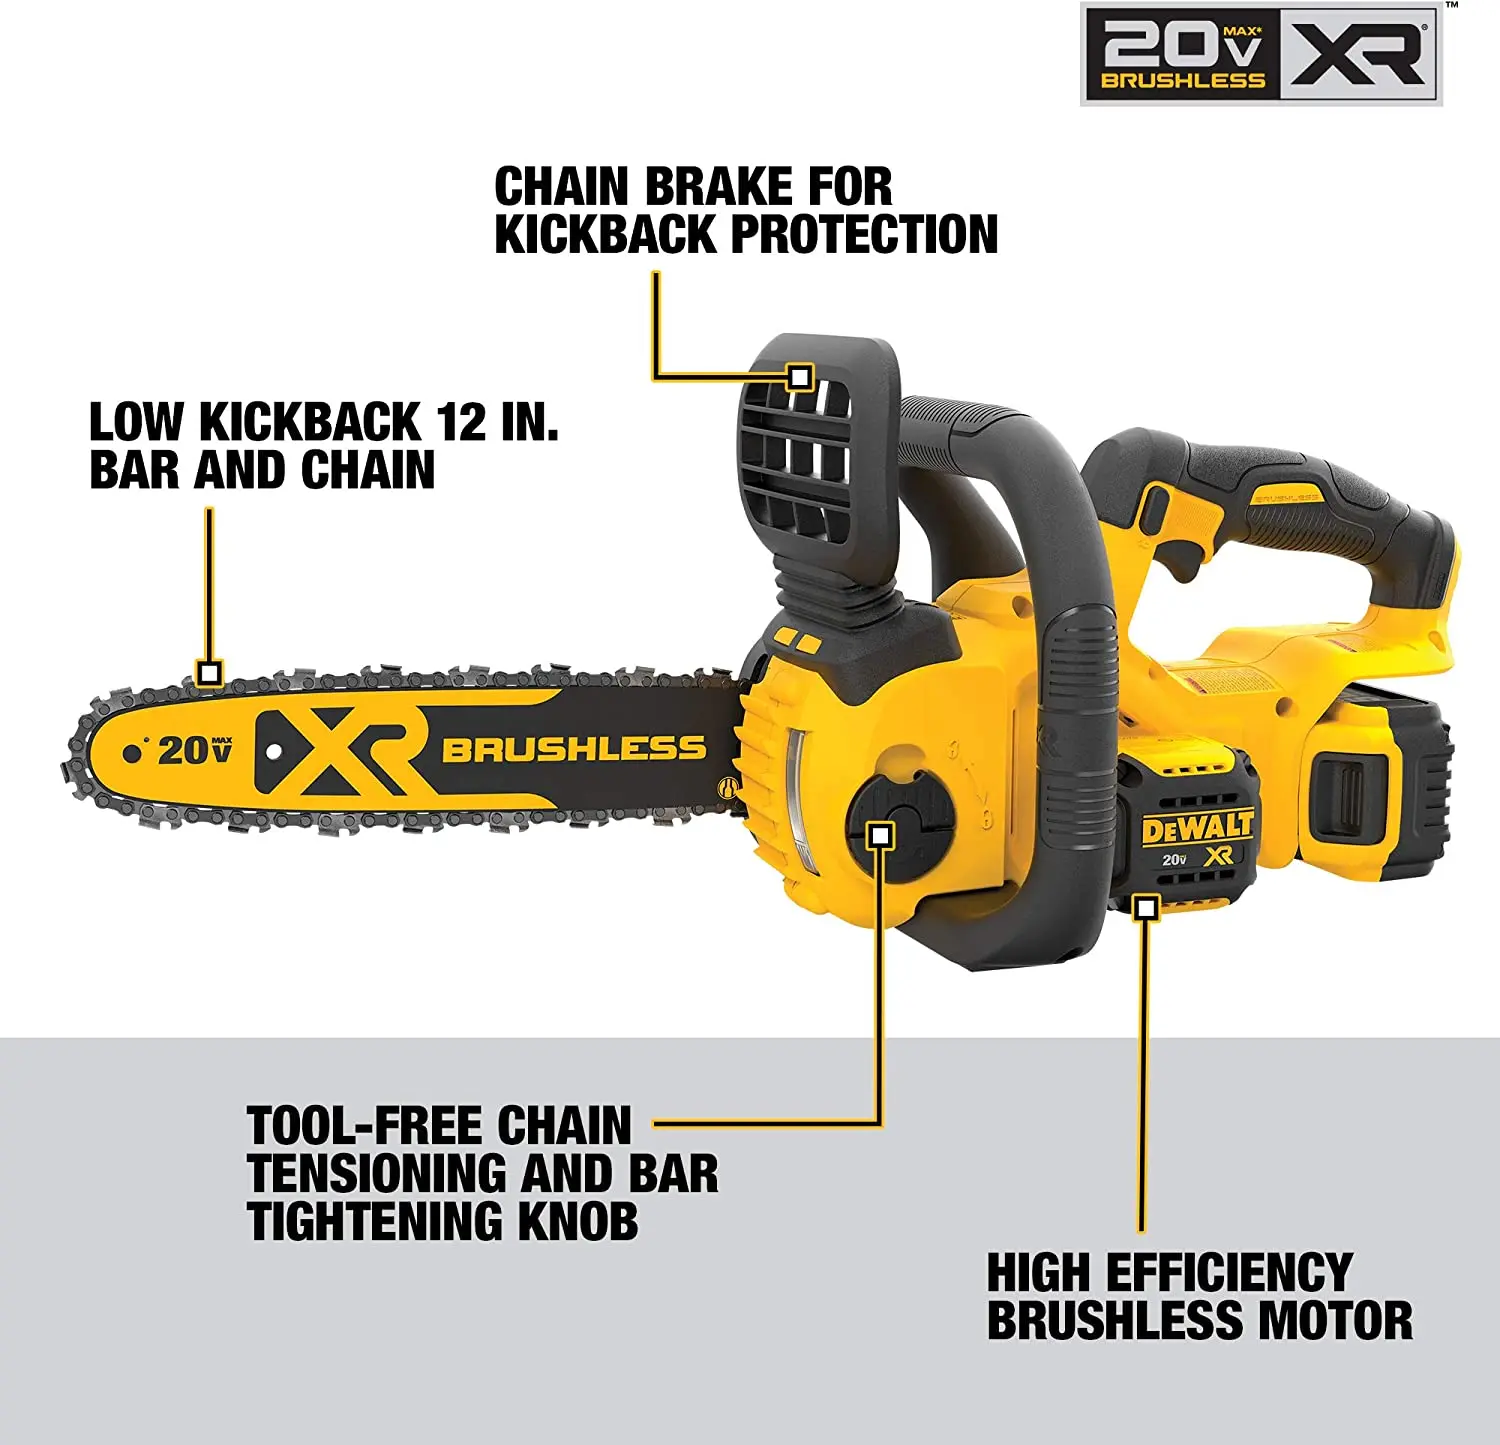 DEWALT 20V Brushless Cordless Compact Chainsaw | Power Tool